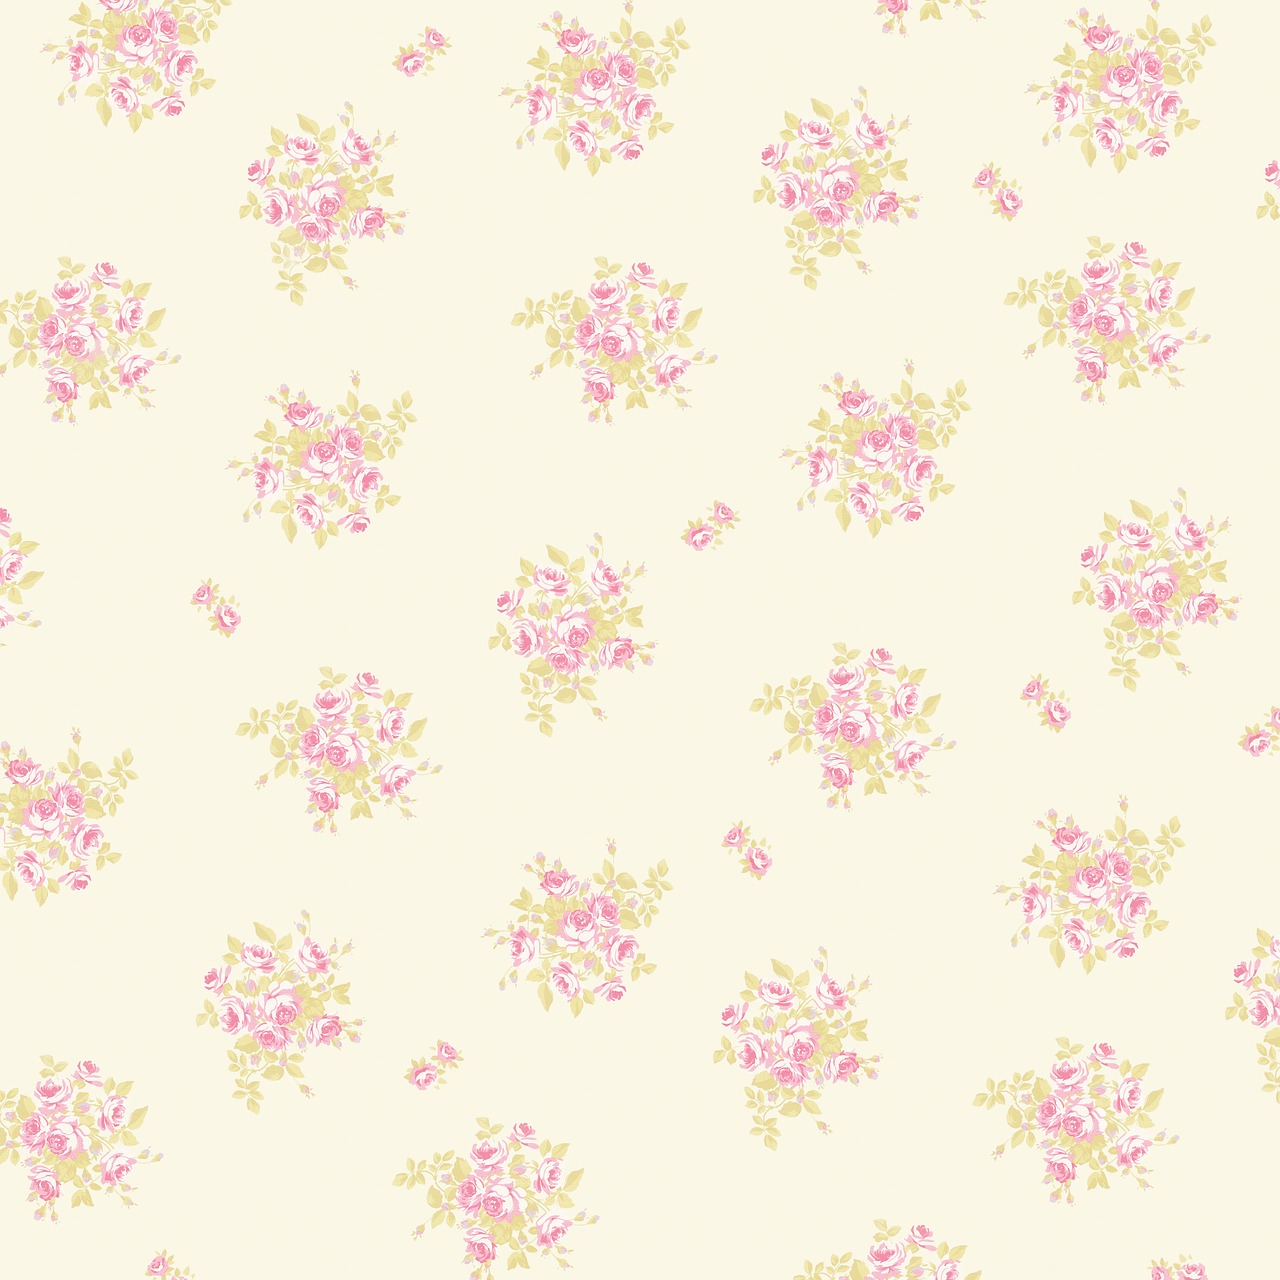 floral paper floral background floral pattern free photo